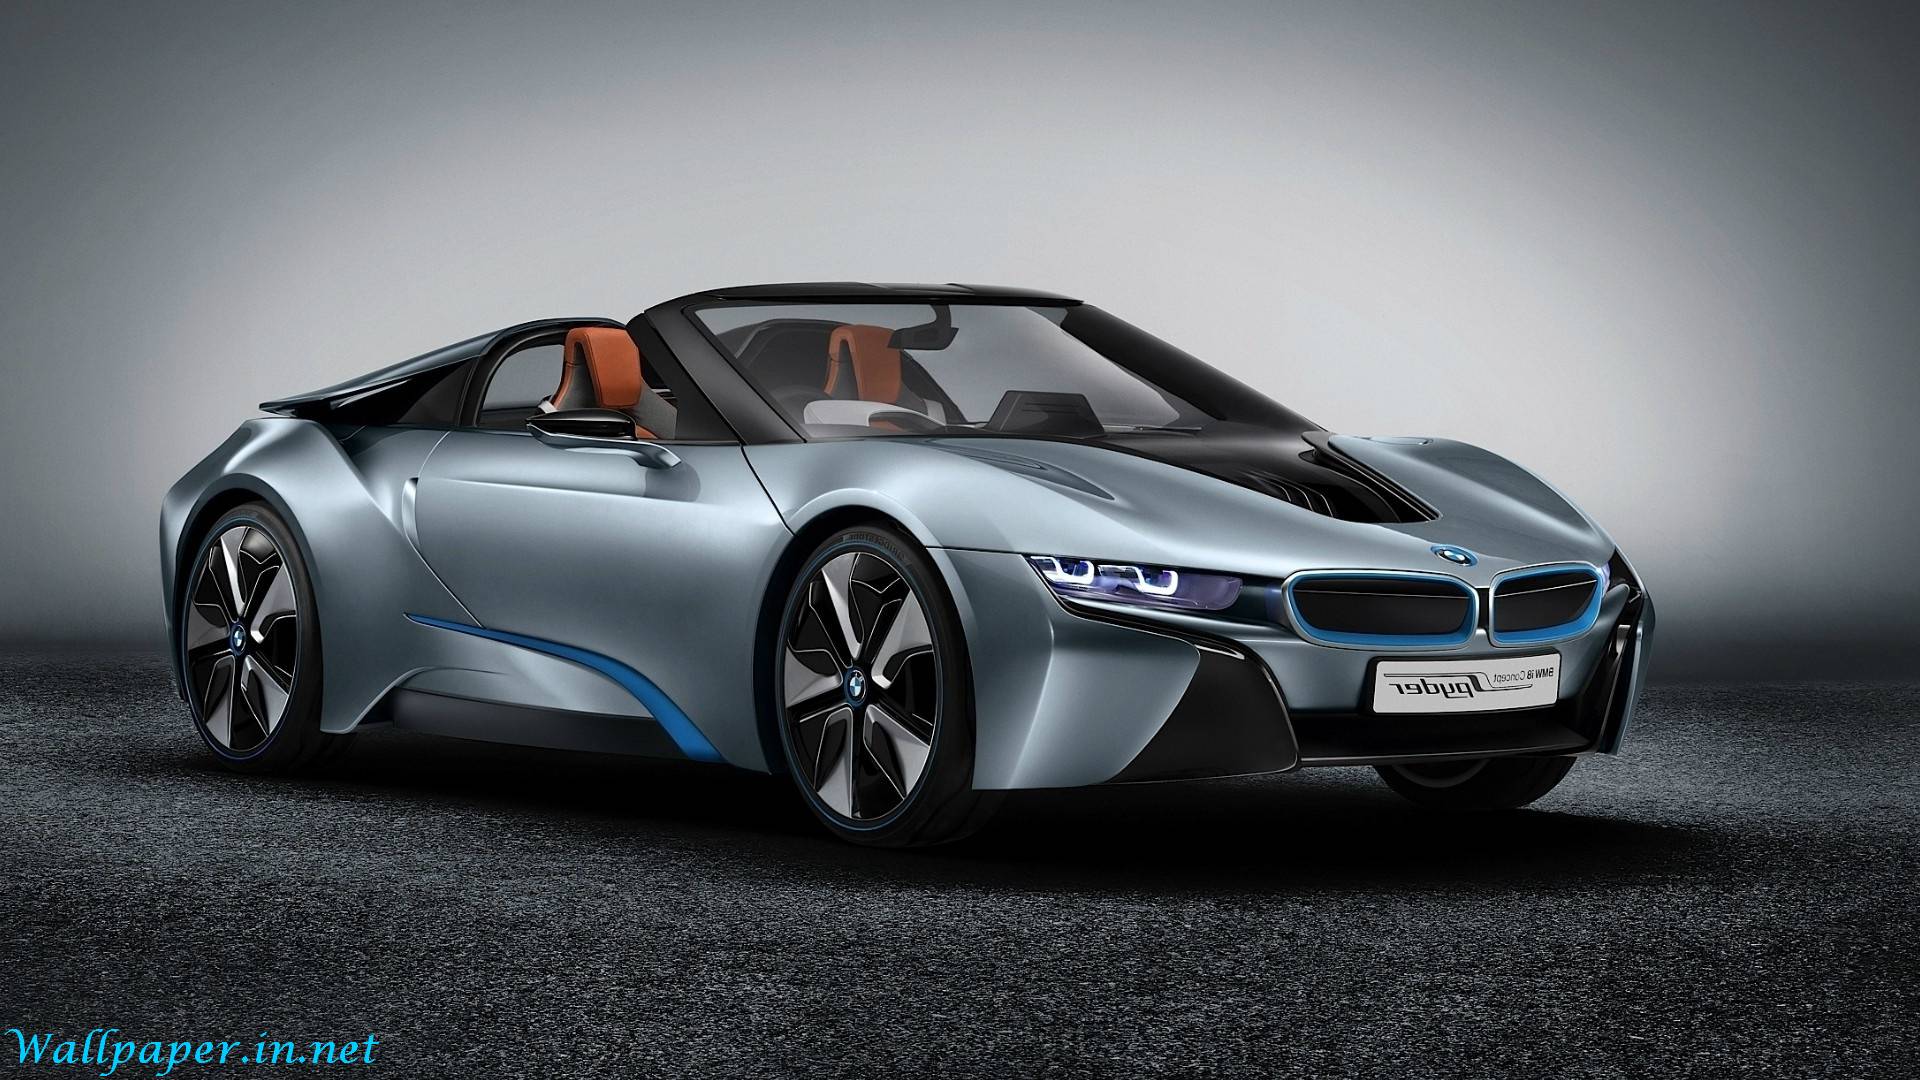 New Bmw Car Images Download